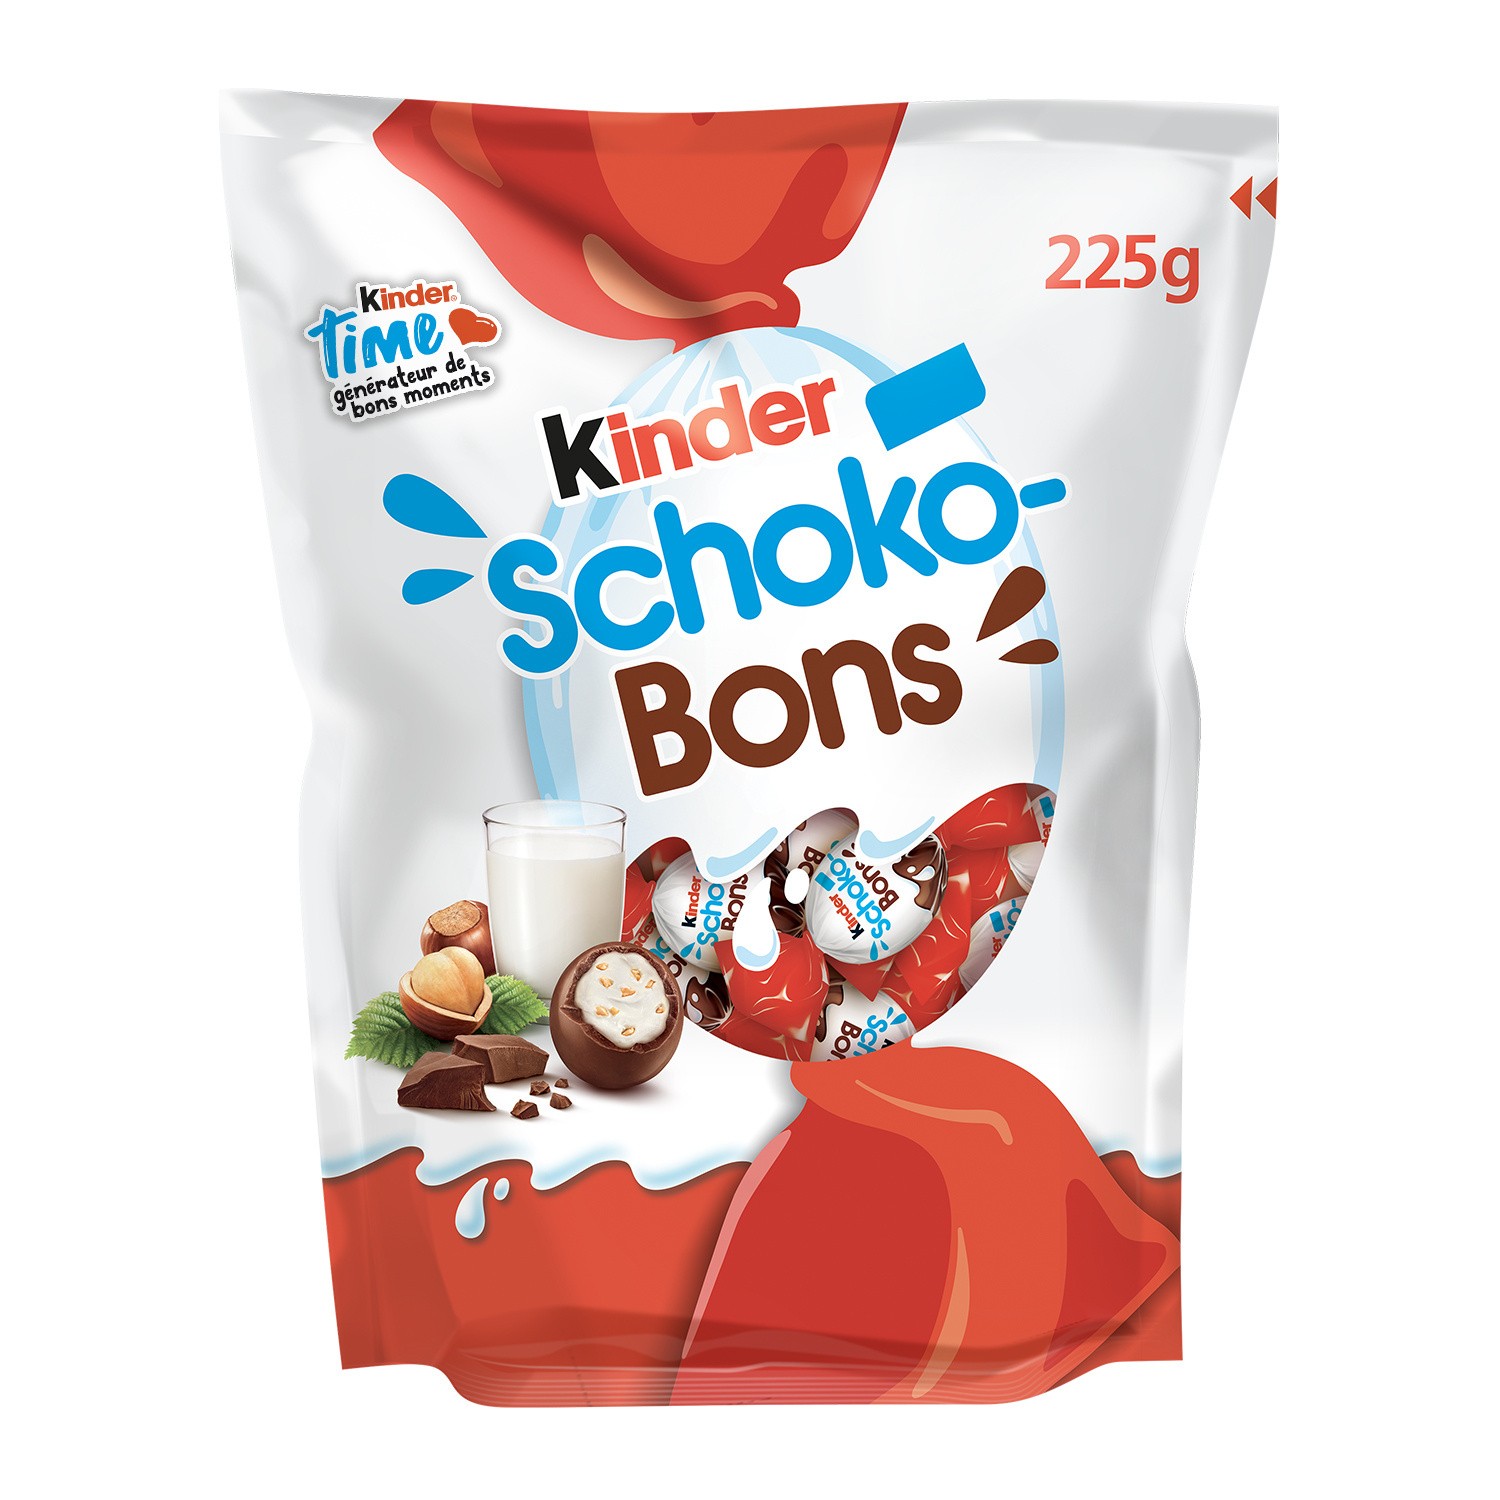 Buy Kinder Schoko Bons, 320g online at a great price